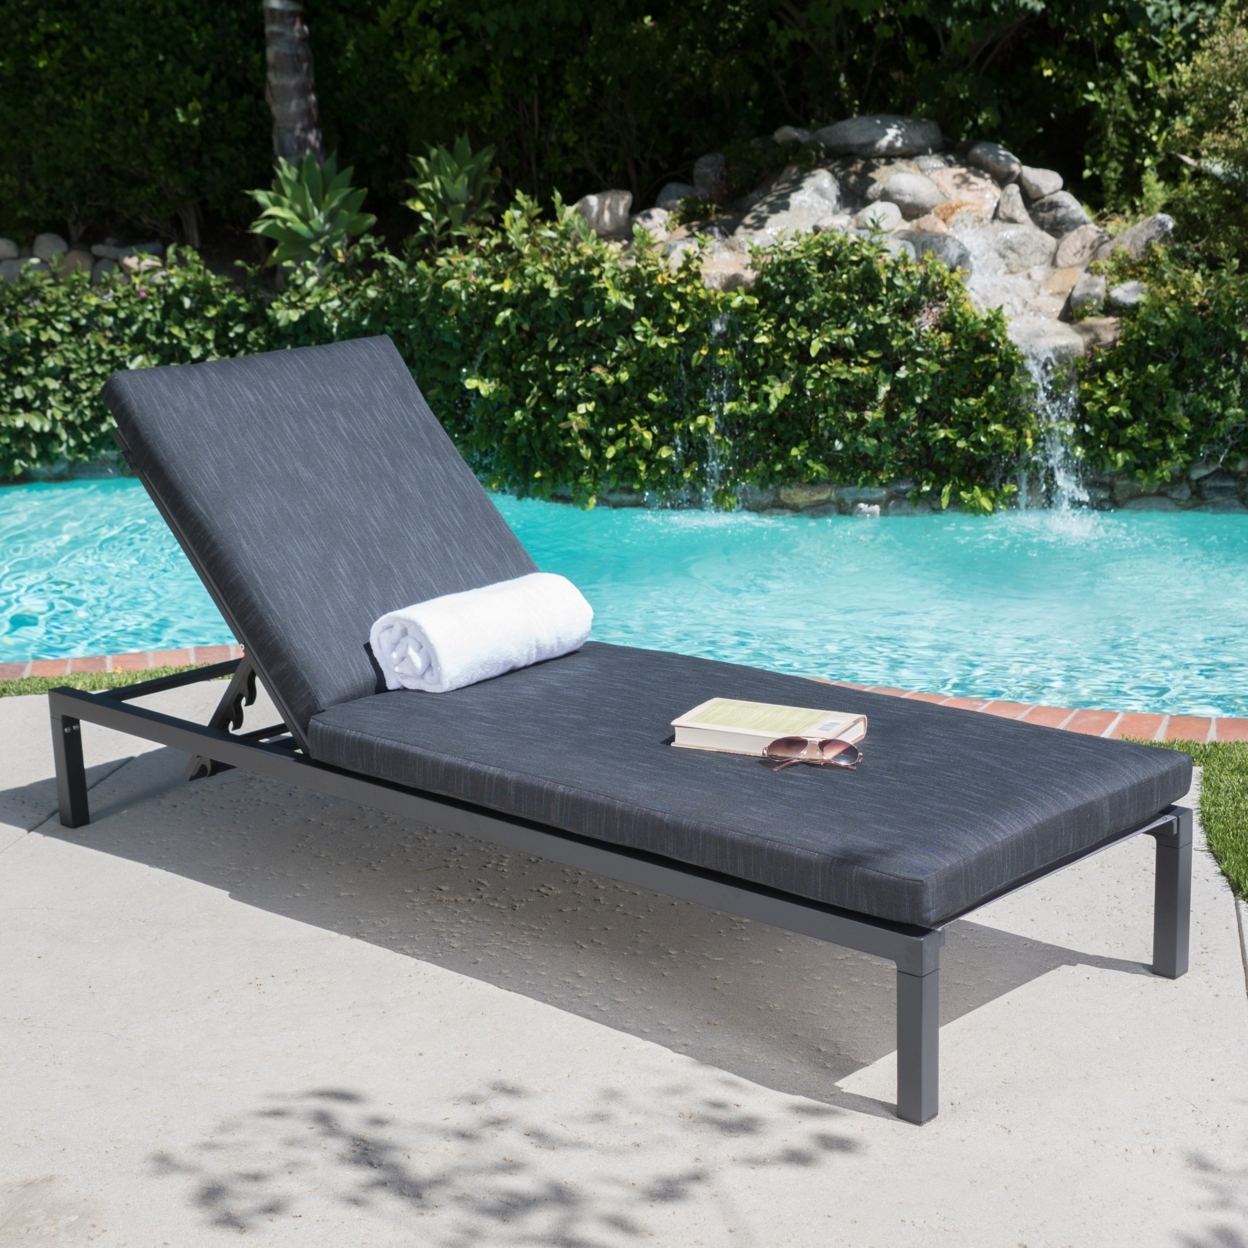 Nealie Outdoor Mesh Aluminum Frame Chaise Lounge With Water Resistant Cushion - Dark Gray, Single